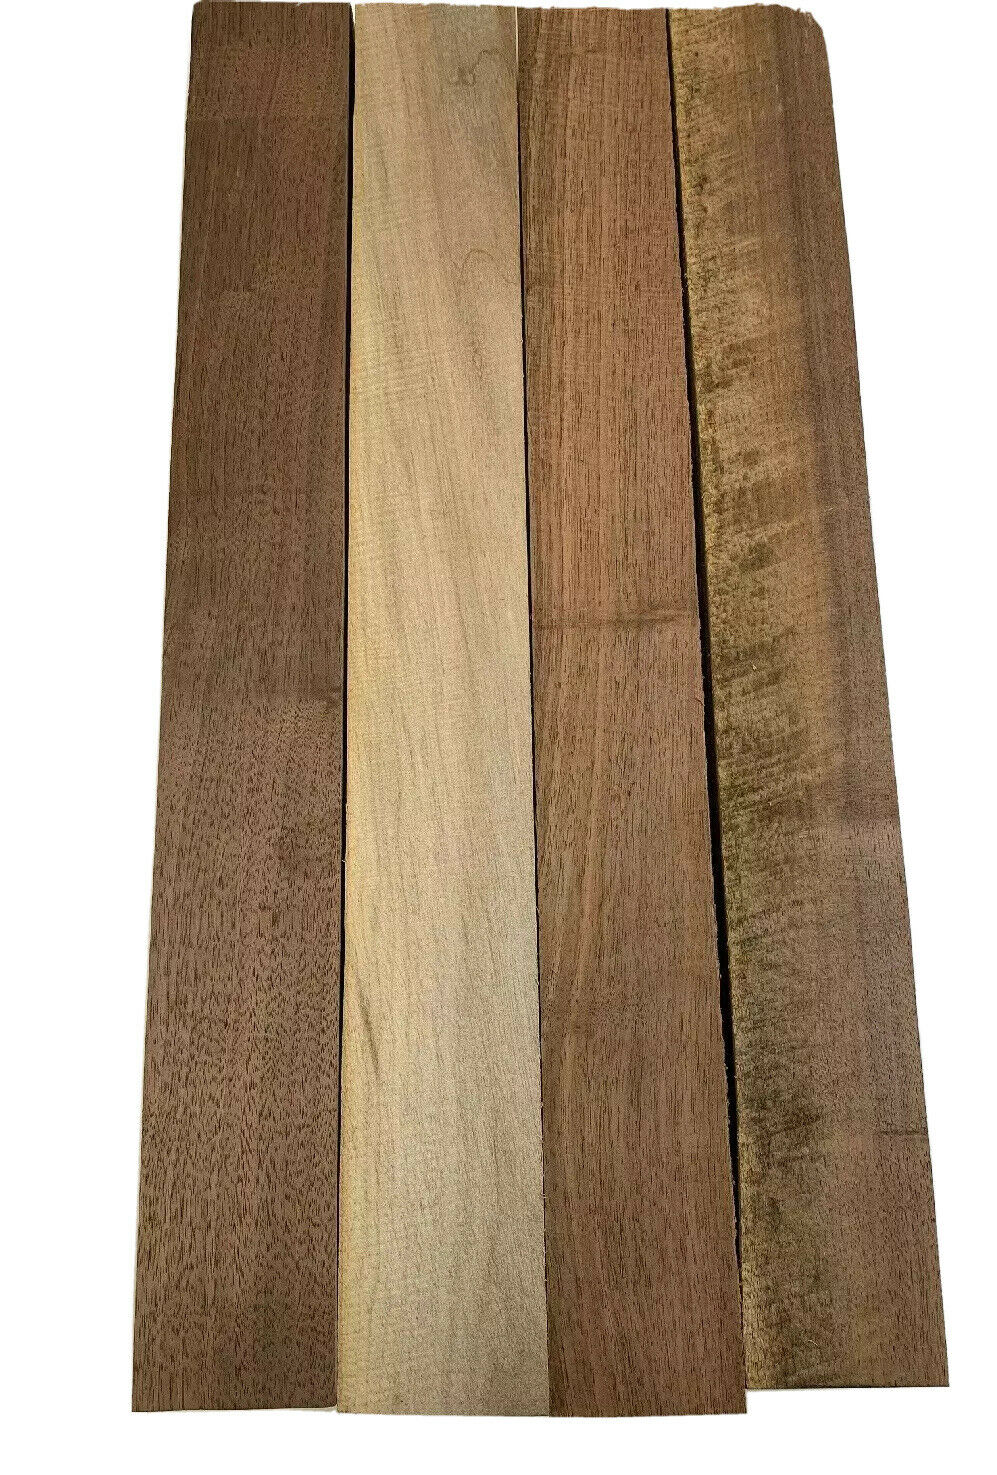 Pack of 4, Black Walnut Lumber Board, Turning Wood of Size 2&quot; X 2&quot; X 6&quot; - Exotic Wood Zone 